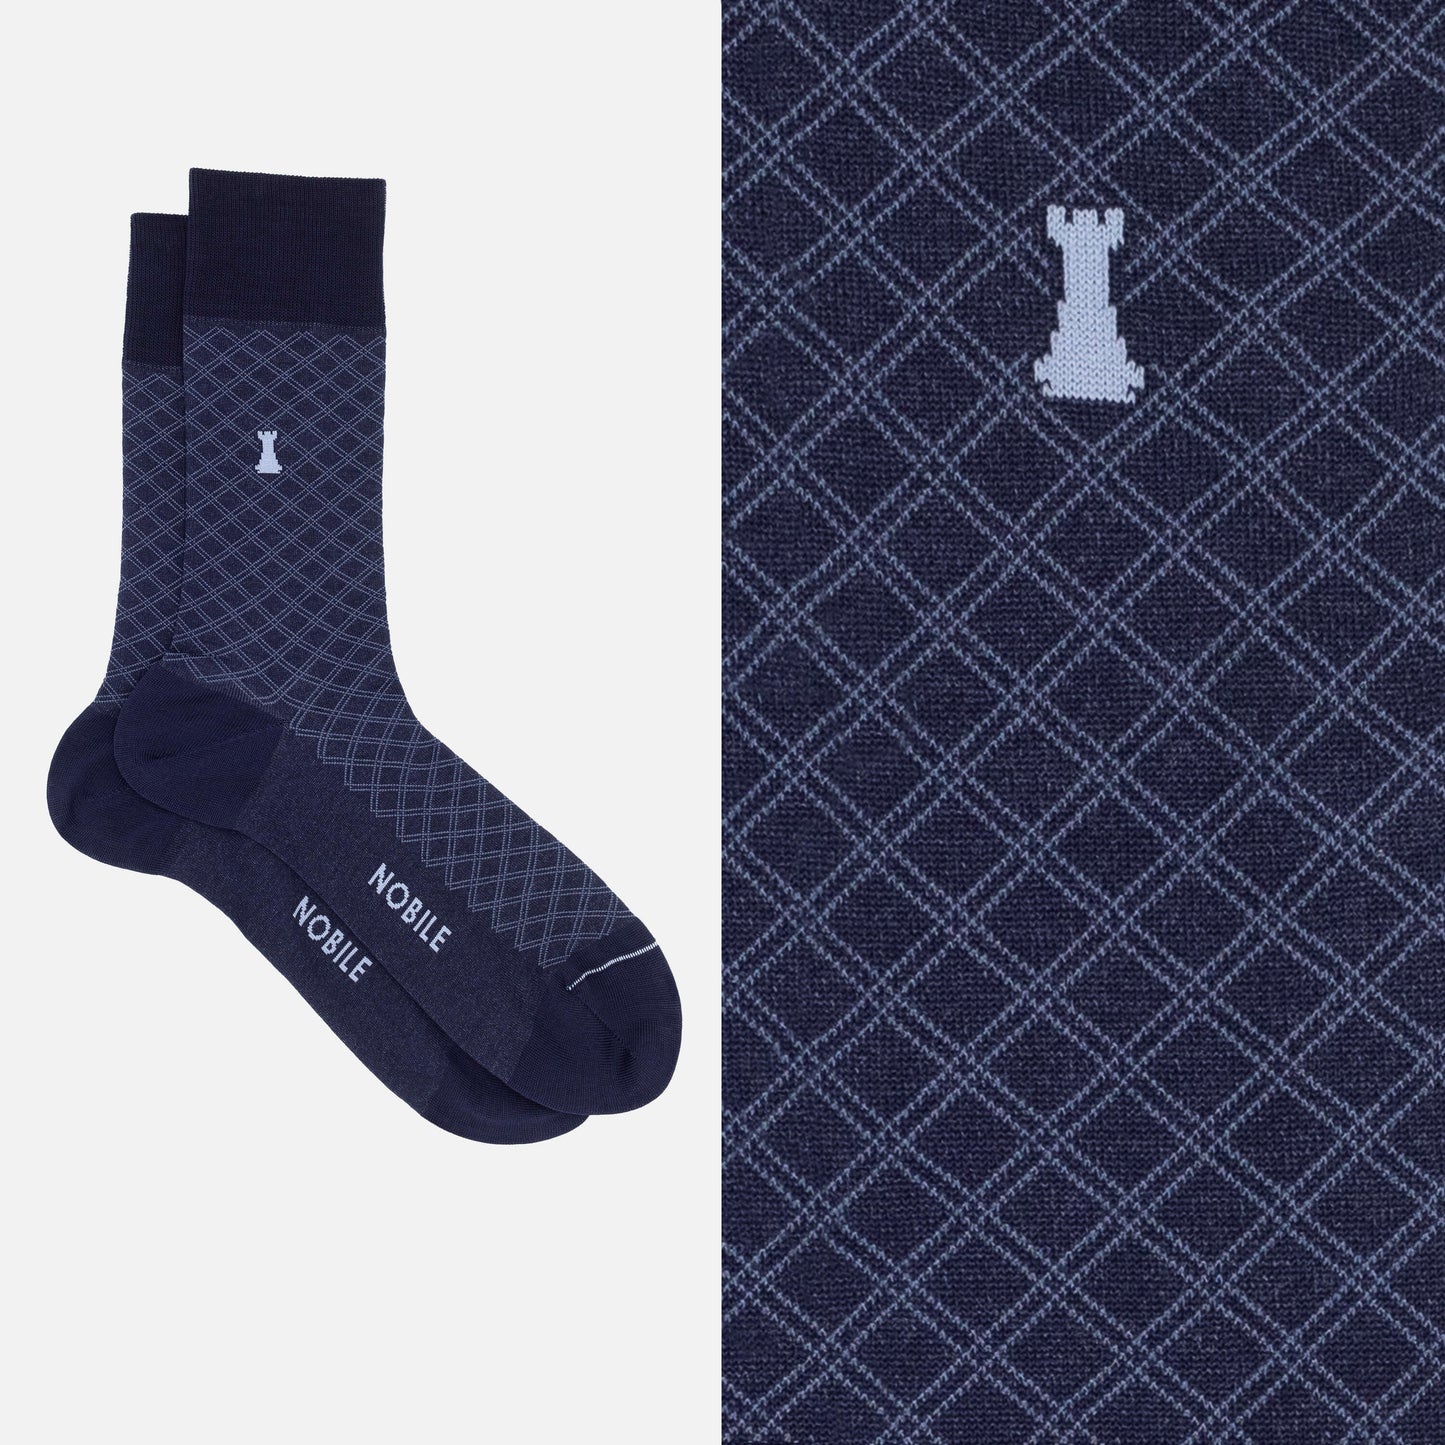 The Great Gatsby Box of 6 crew socks - Mixed designs